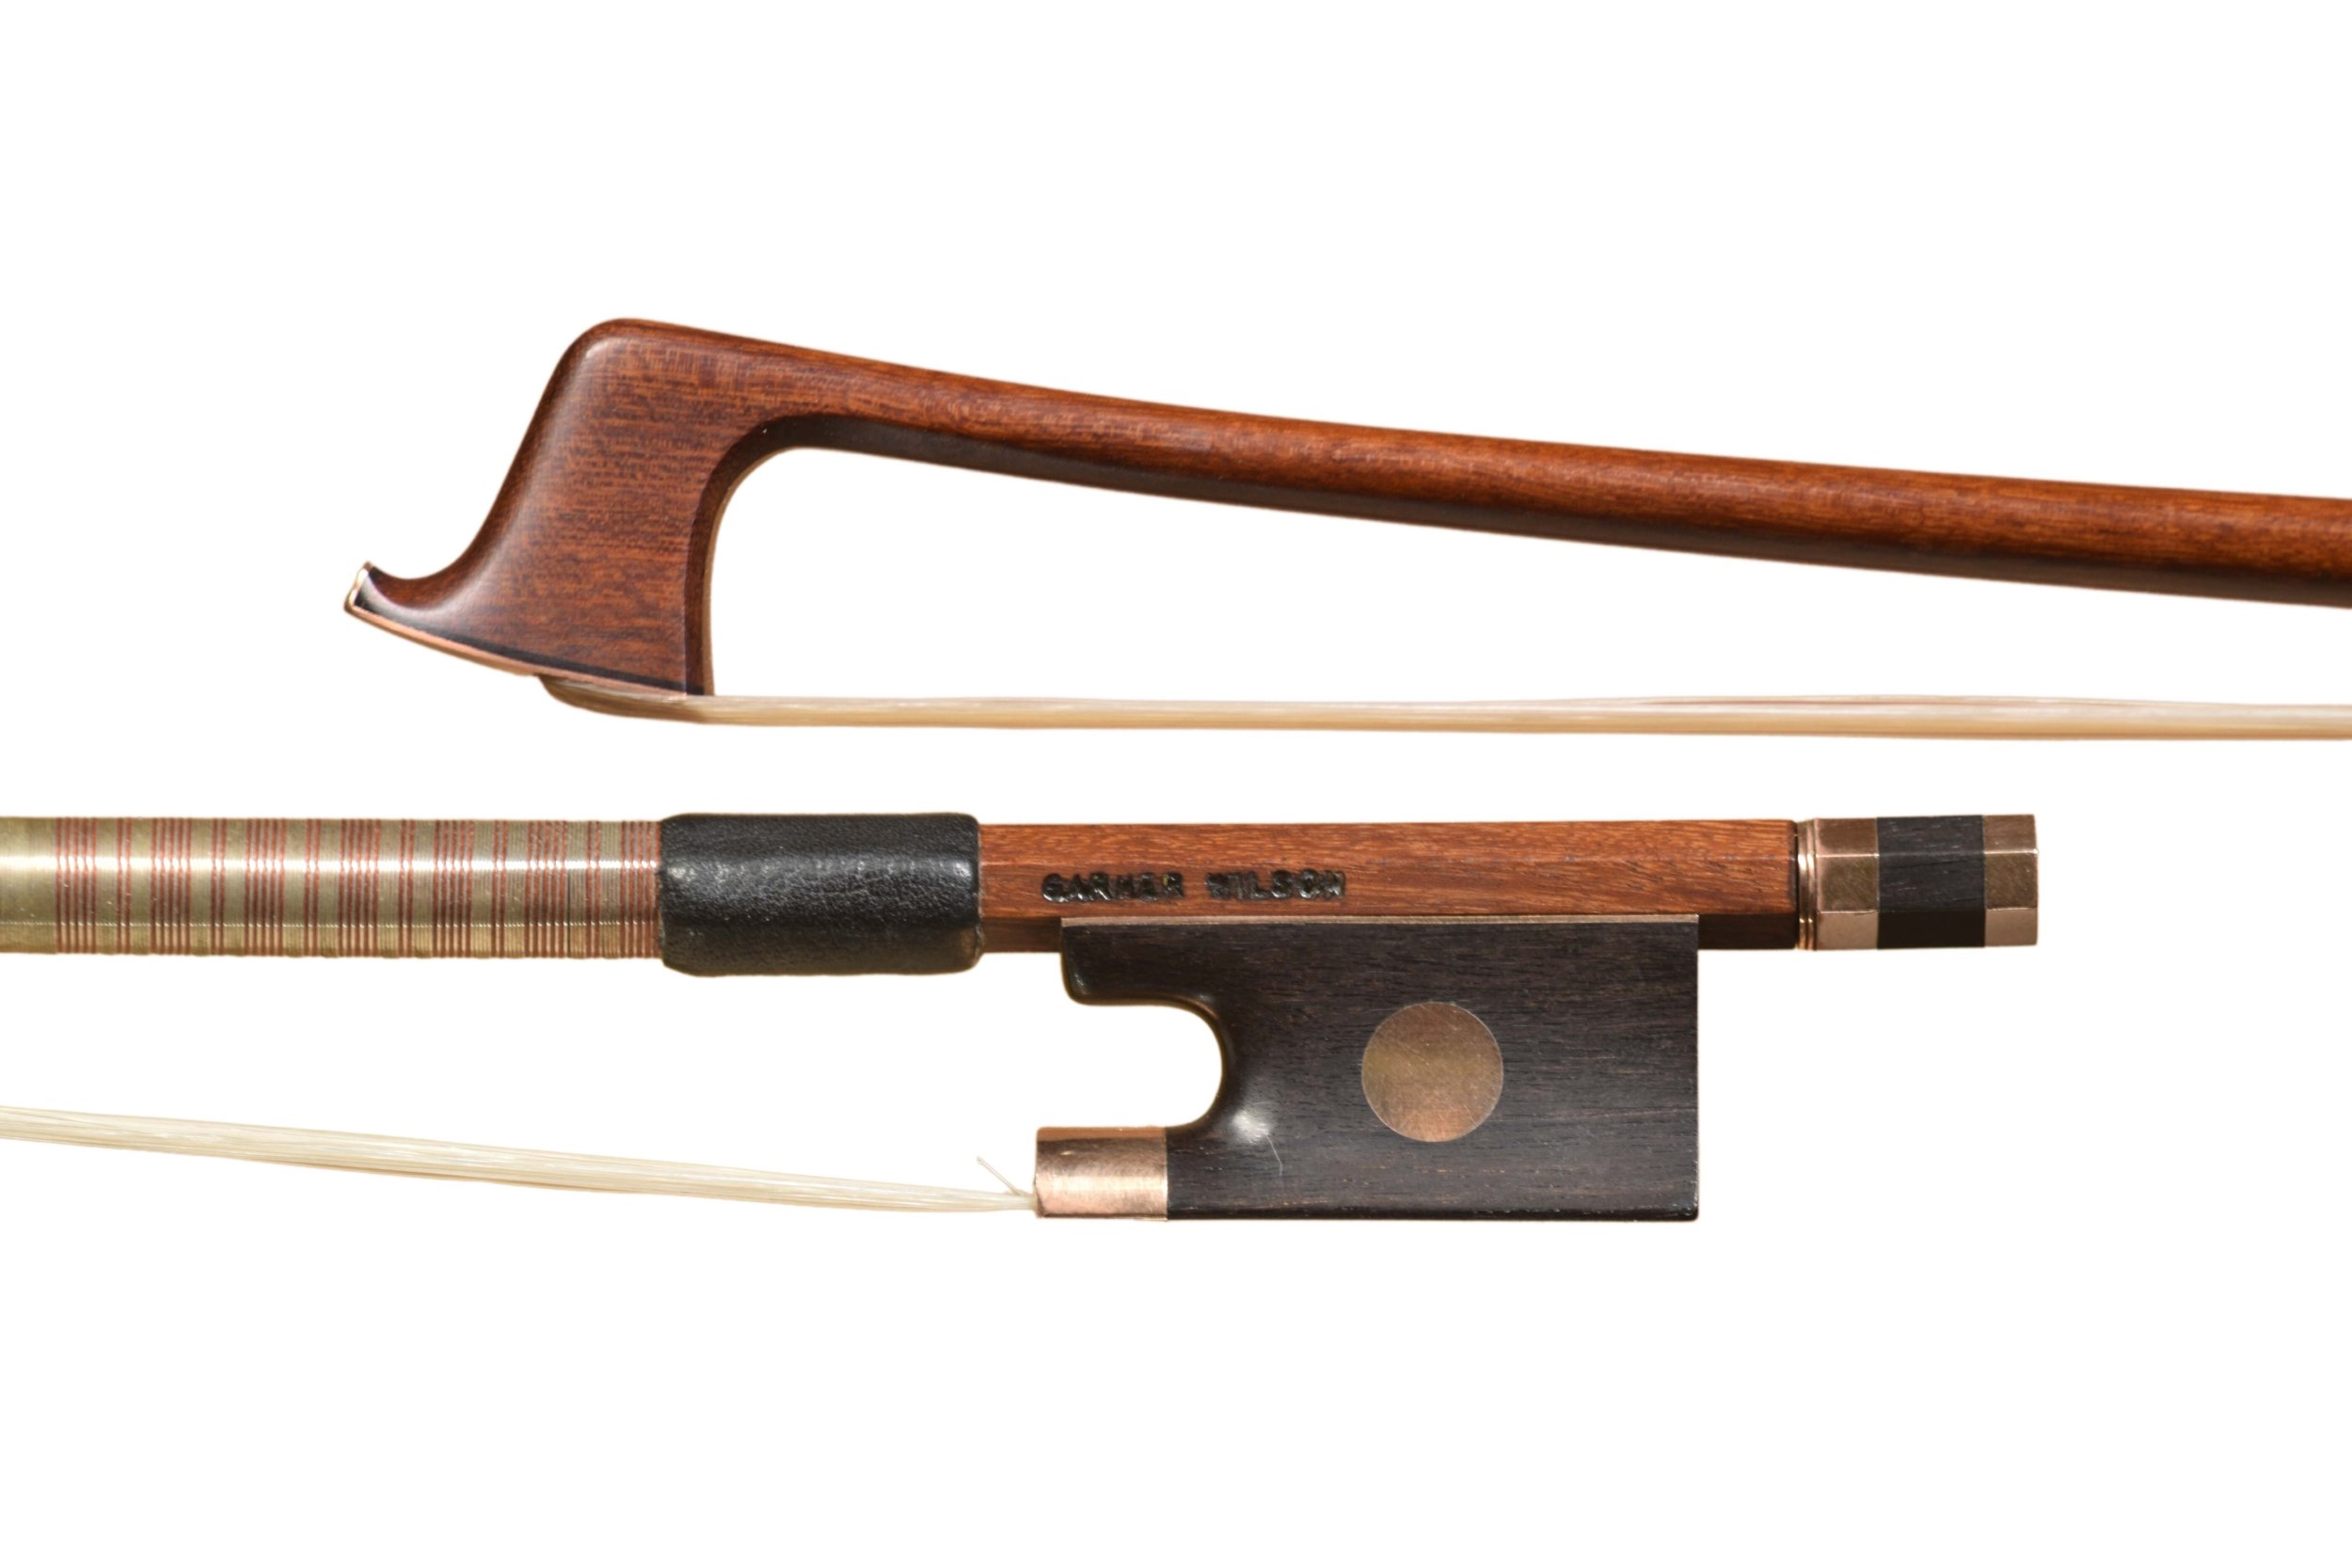 Frog and head of the viola bow by Hill maker Garner Wilson